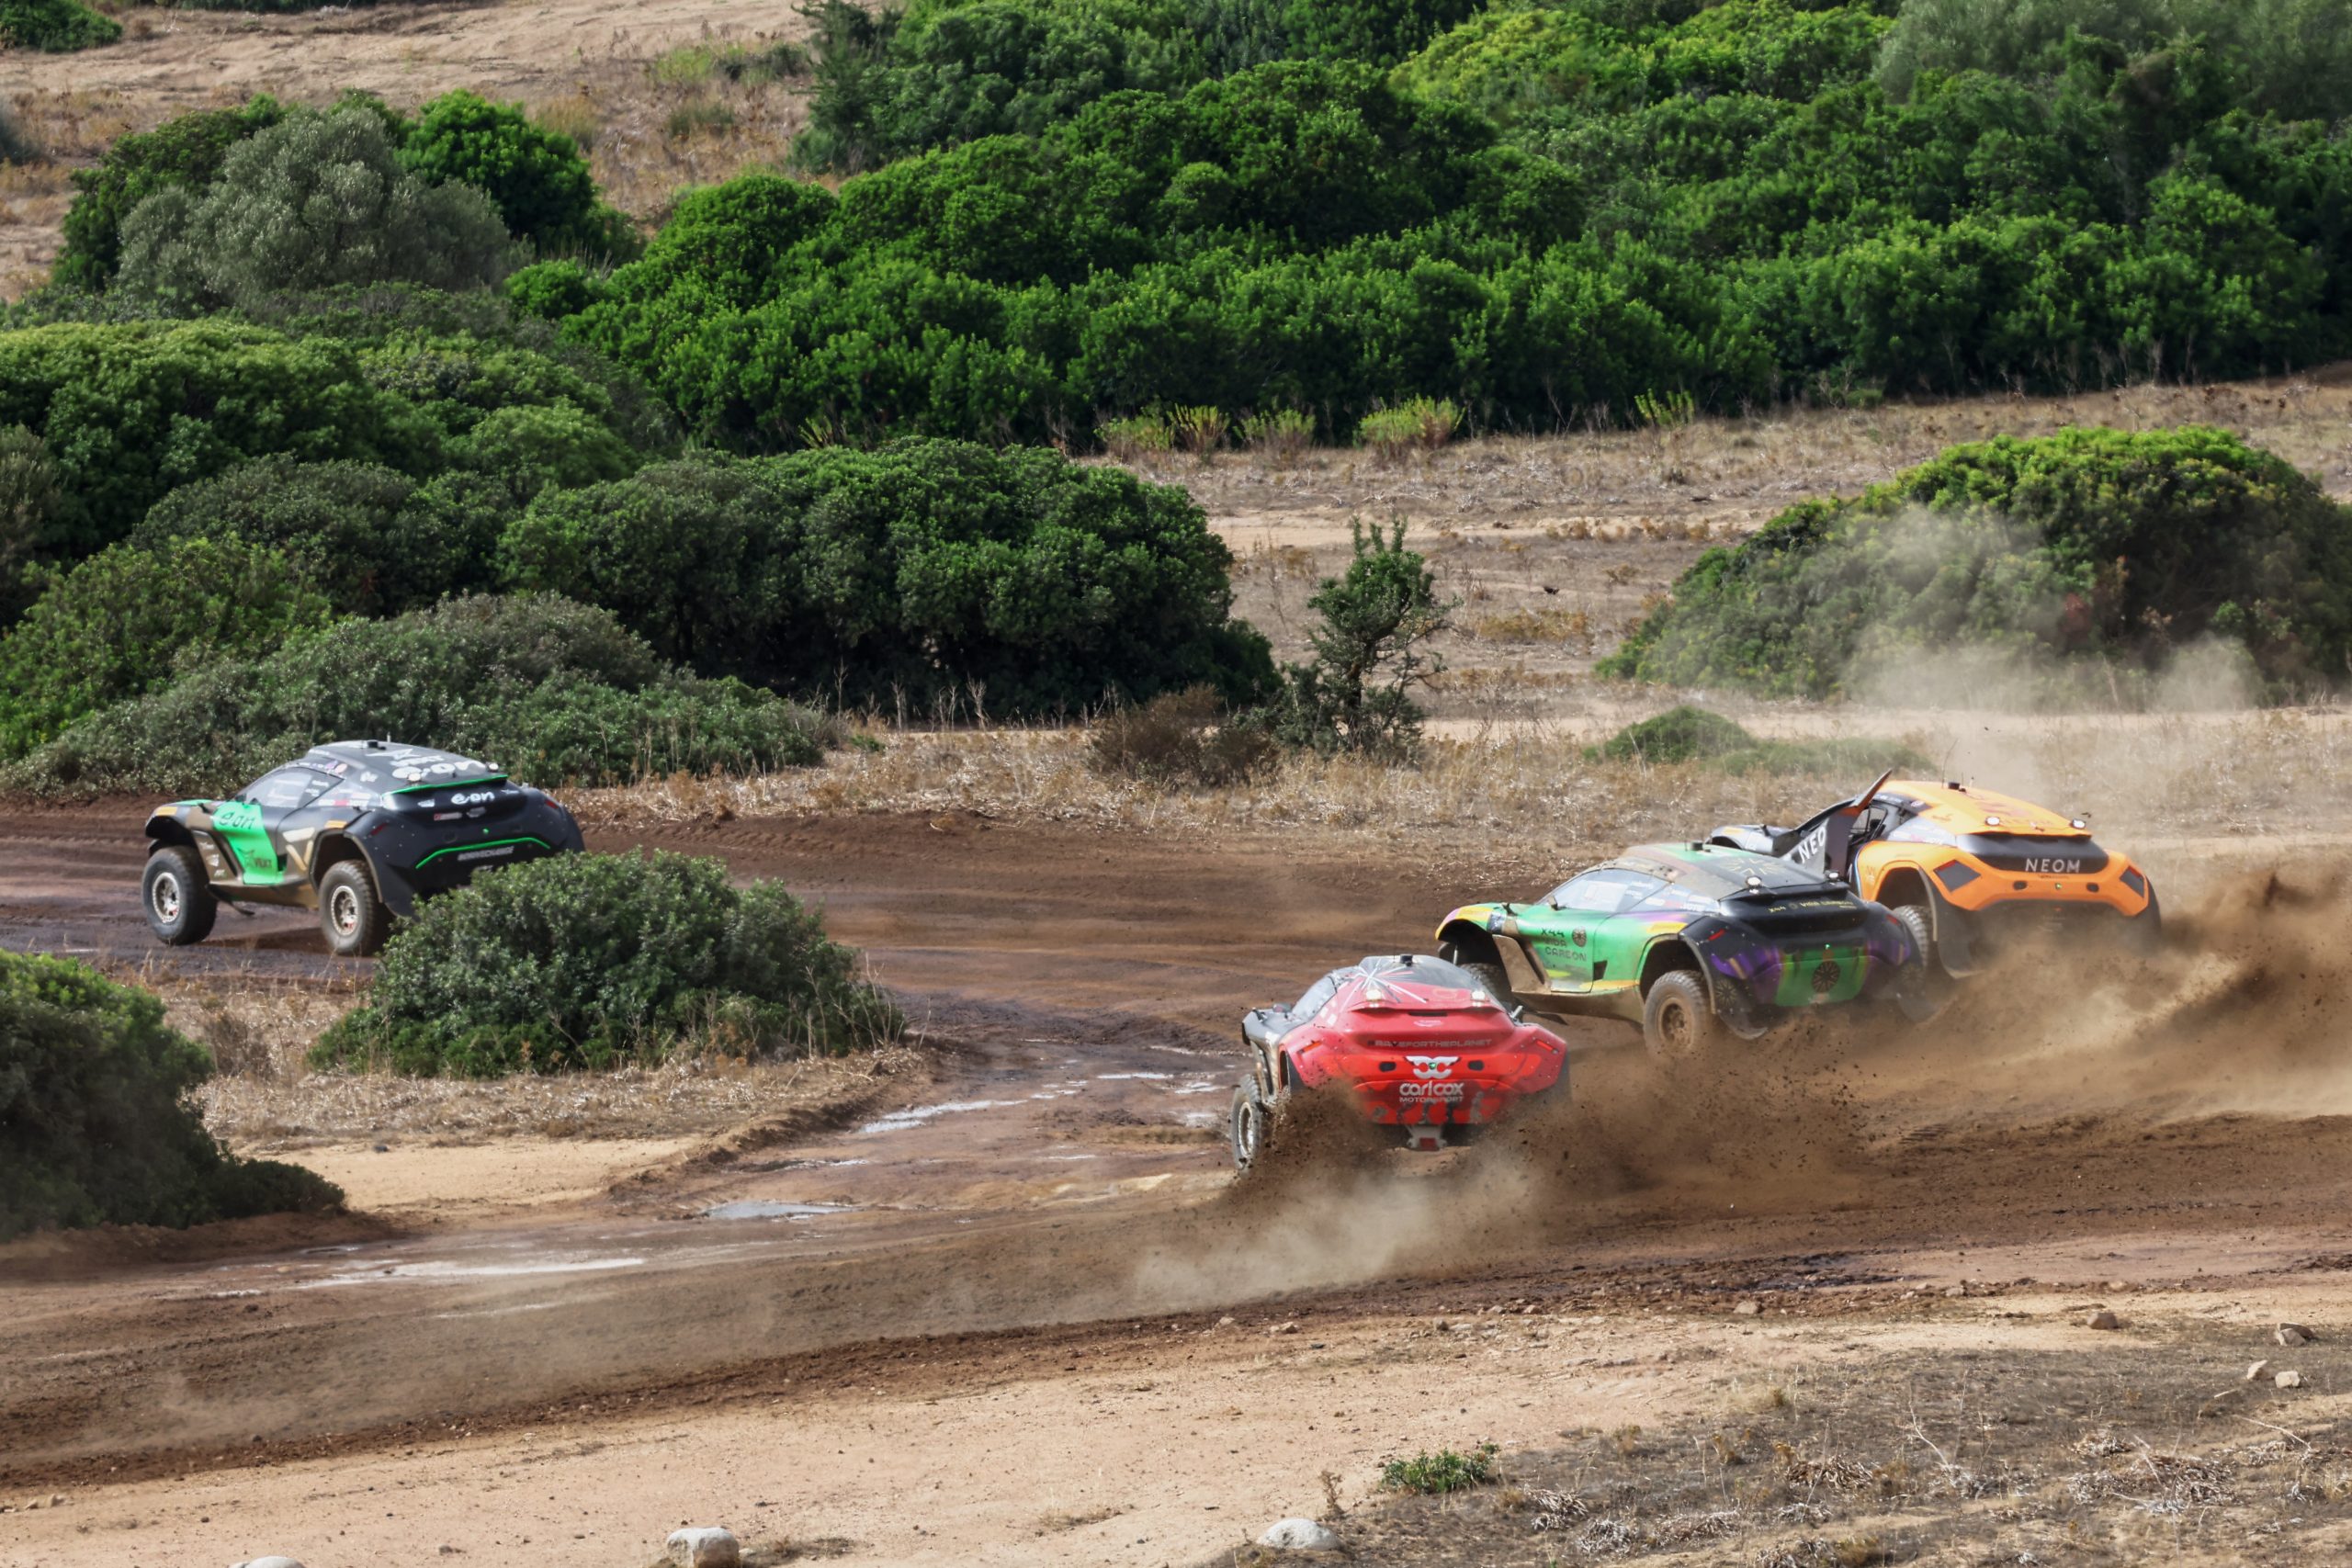 JULY 08: Molly Taylor (AUS) / Kevin Hansen (SWE), Veloce Racing, leads Emma Gilmour (NZL) / Tanner Foust (USA), NEOM McLaren Extreme E, Cristina Gutierrez (ESP) / Fraser McConnell (JAM), X44 Vida Carbon Racing, and Lia Block (USA) / Timo Scheider (DEU), Carl Cox Motorsport during the Island X-Prix on July 08, 2023. (Photo by Colin McMaster / LAT Images)